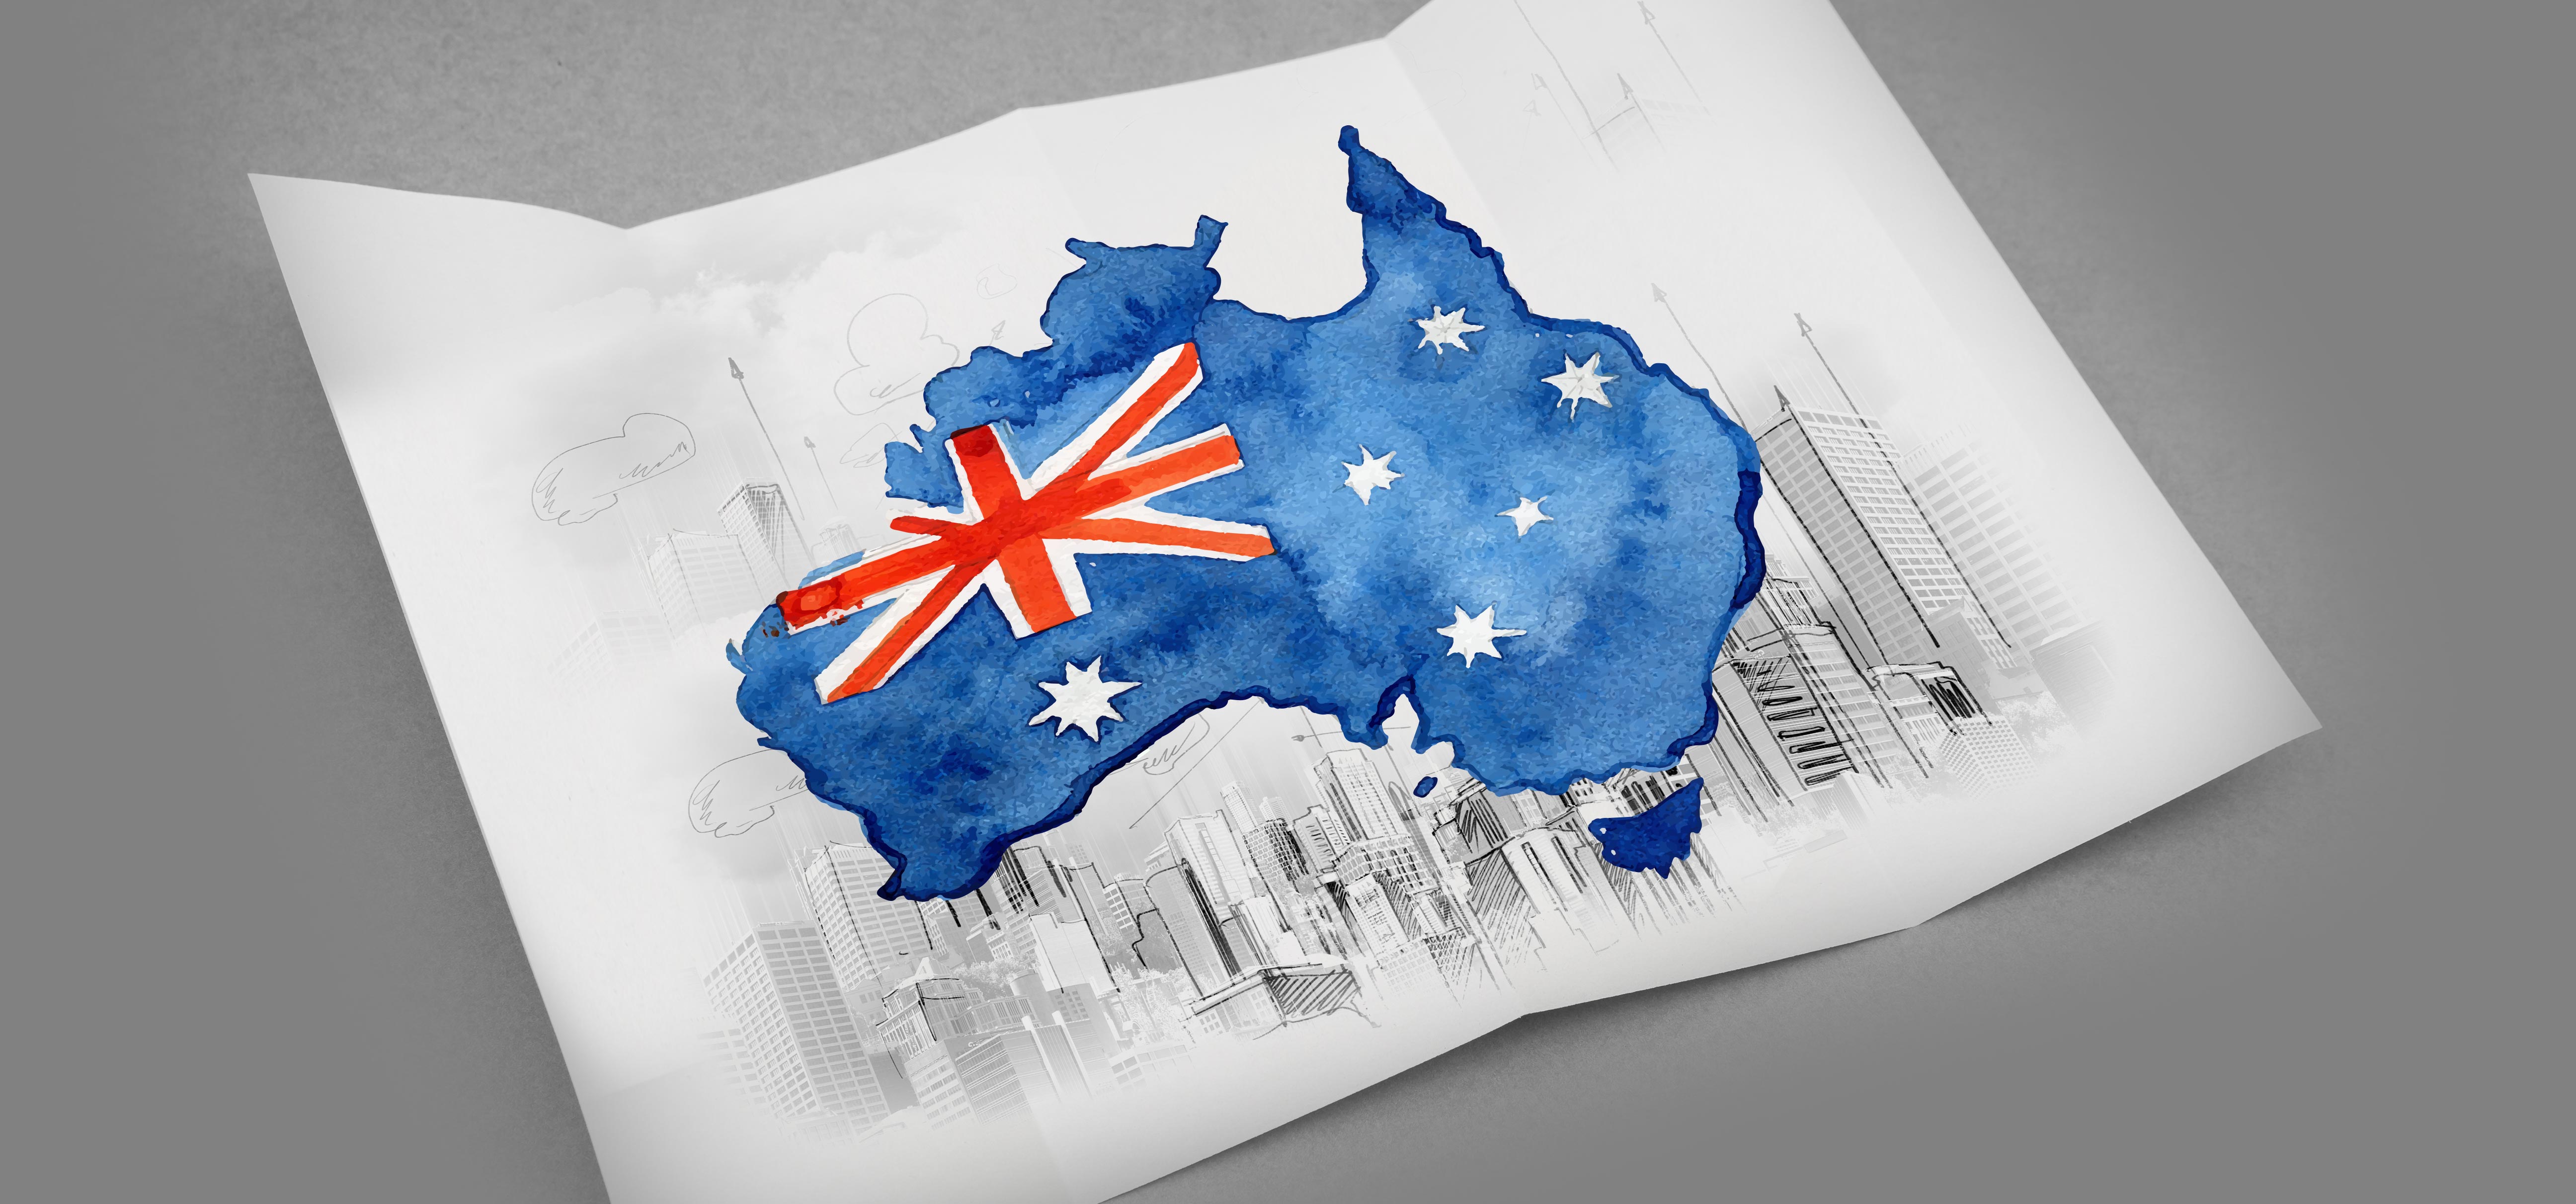 iTWO costX Three Useful Resources for BIM Implementation in Australia